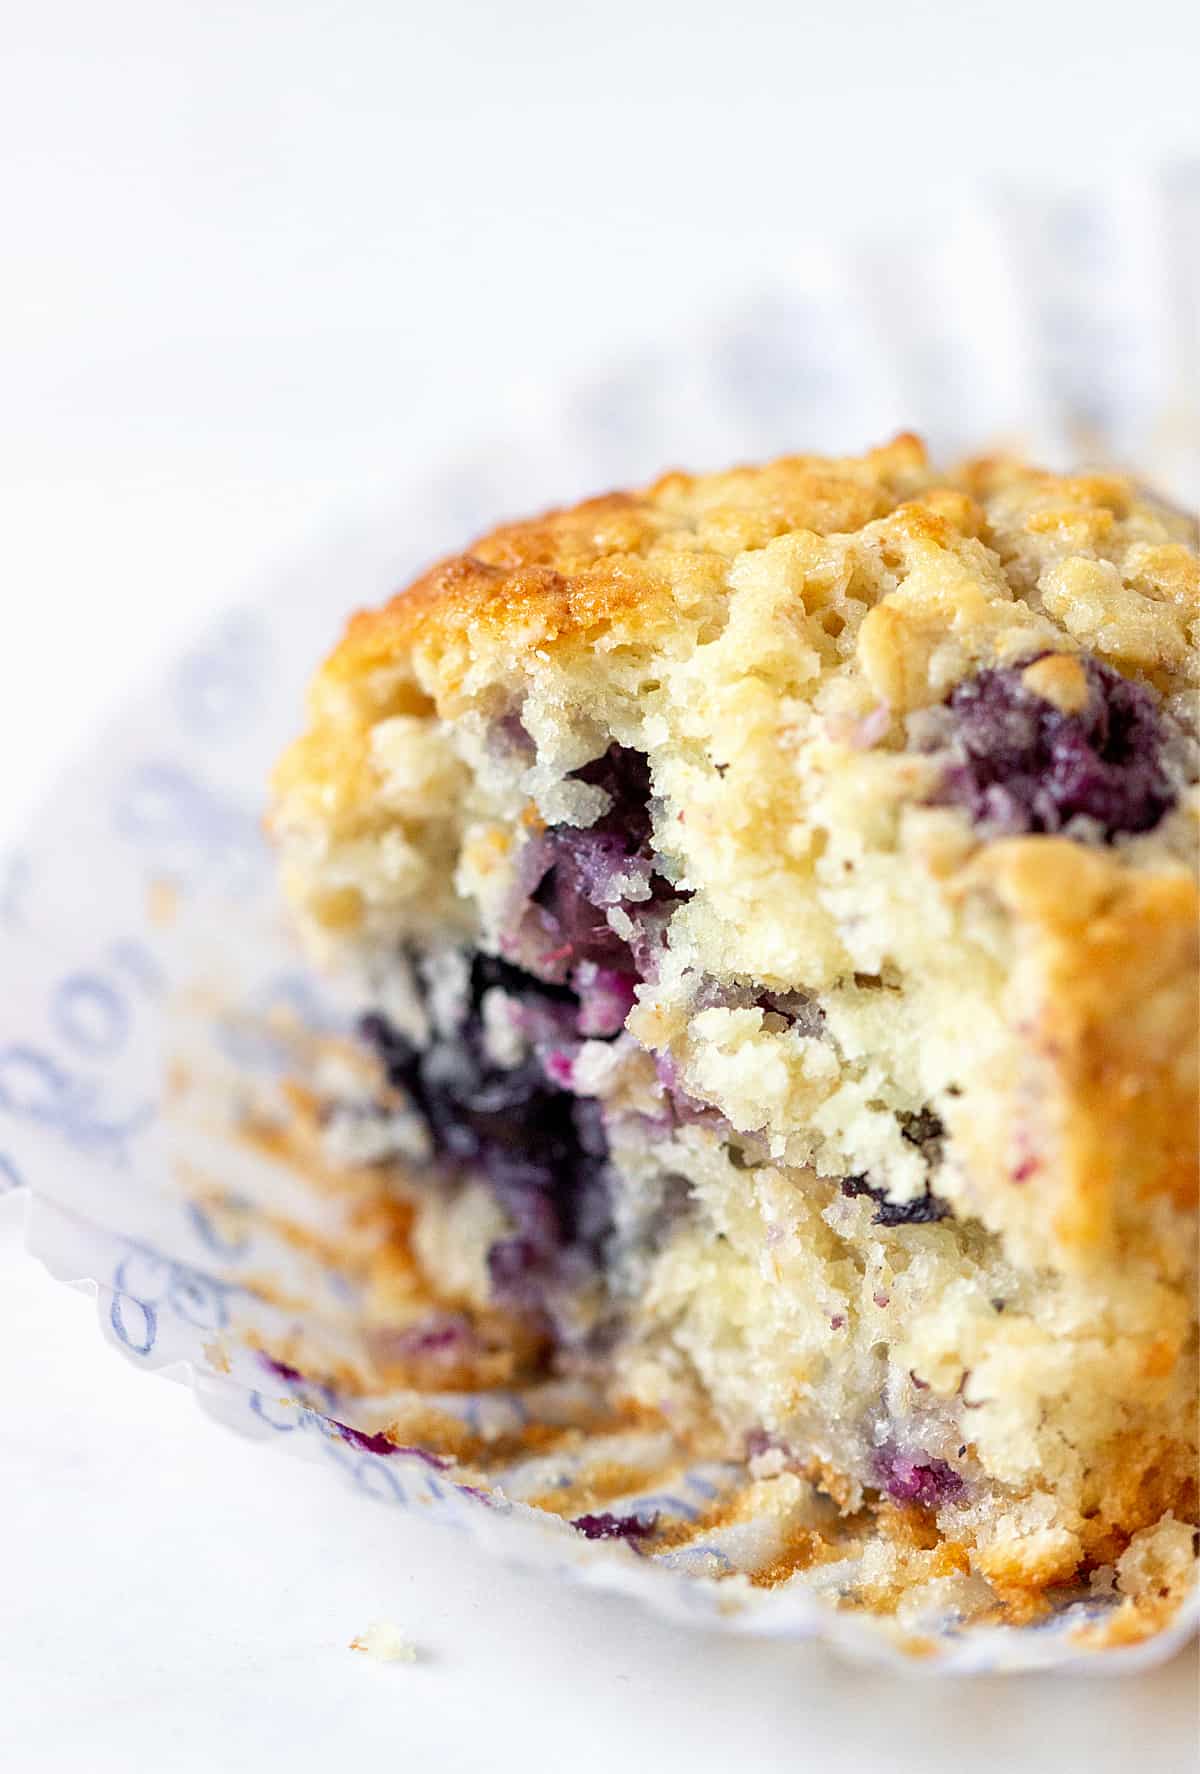 Half blueberry muffin in opened paper cup, white surface.